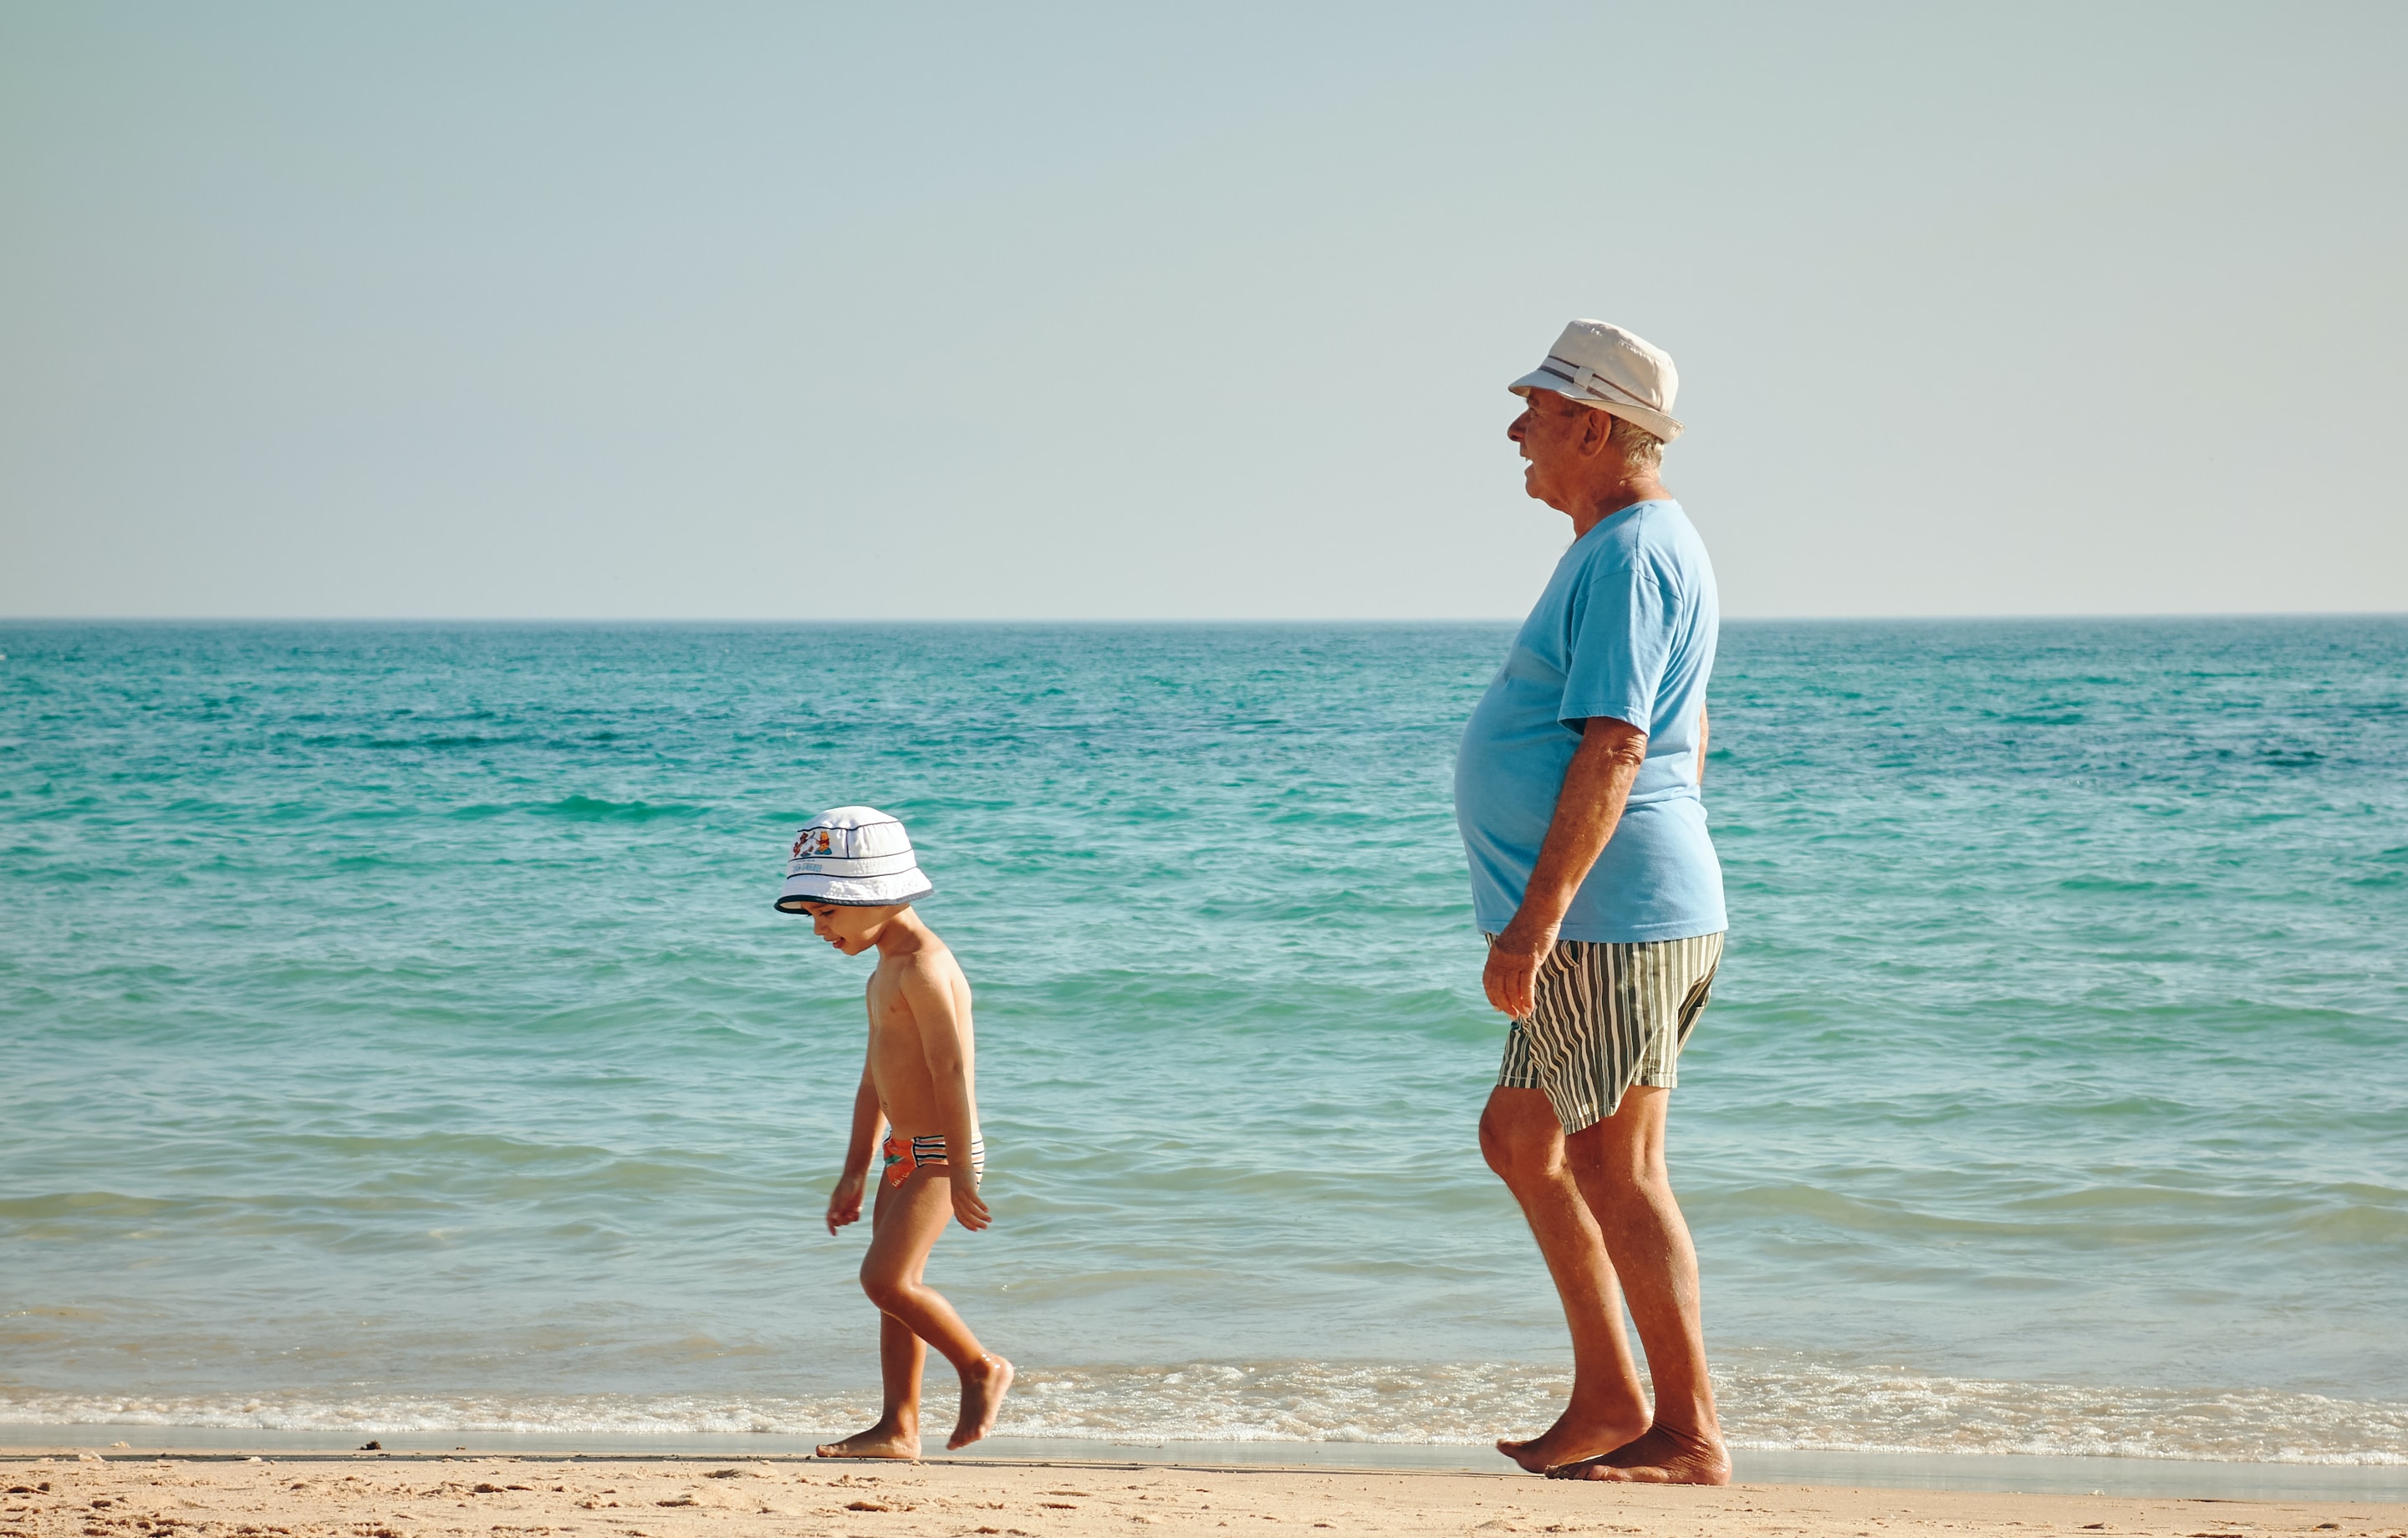 Old man and young boy walk together on the shore of a beach.